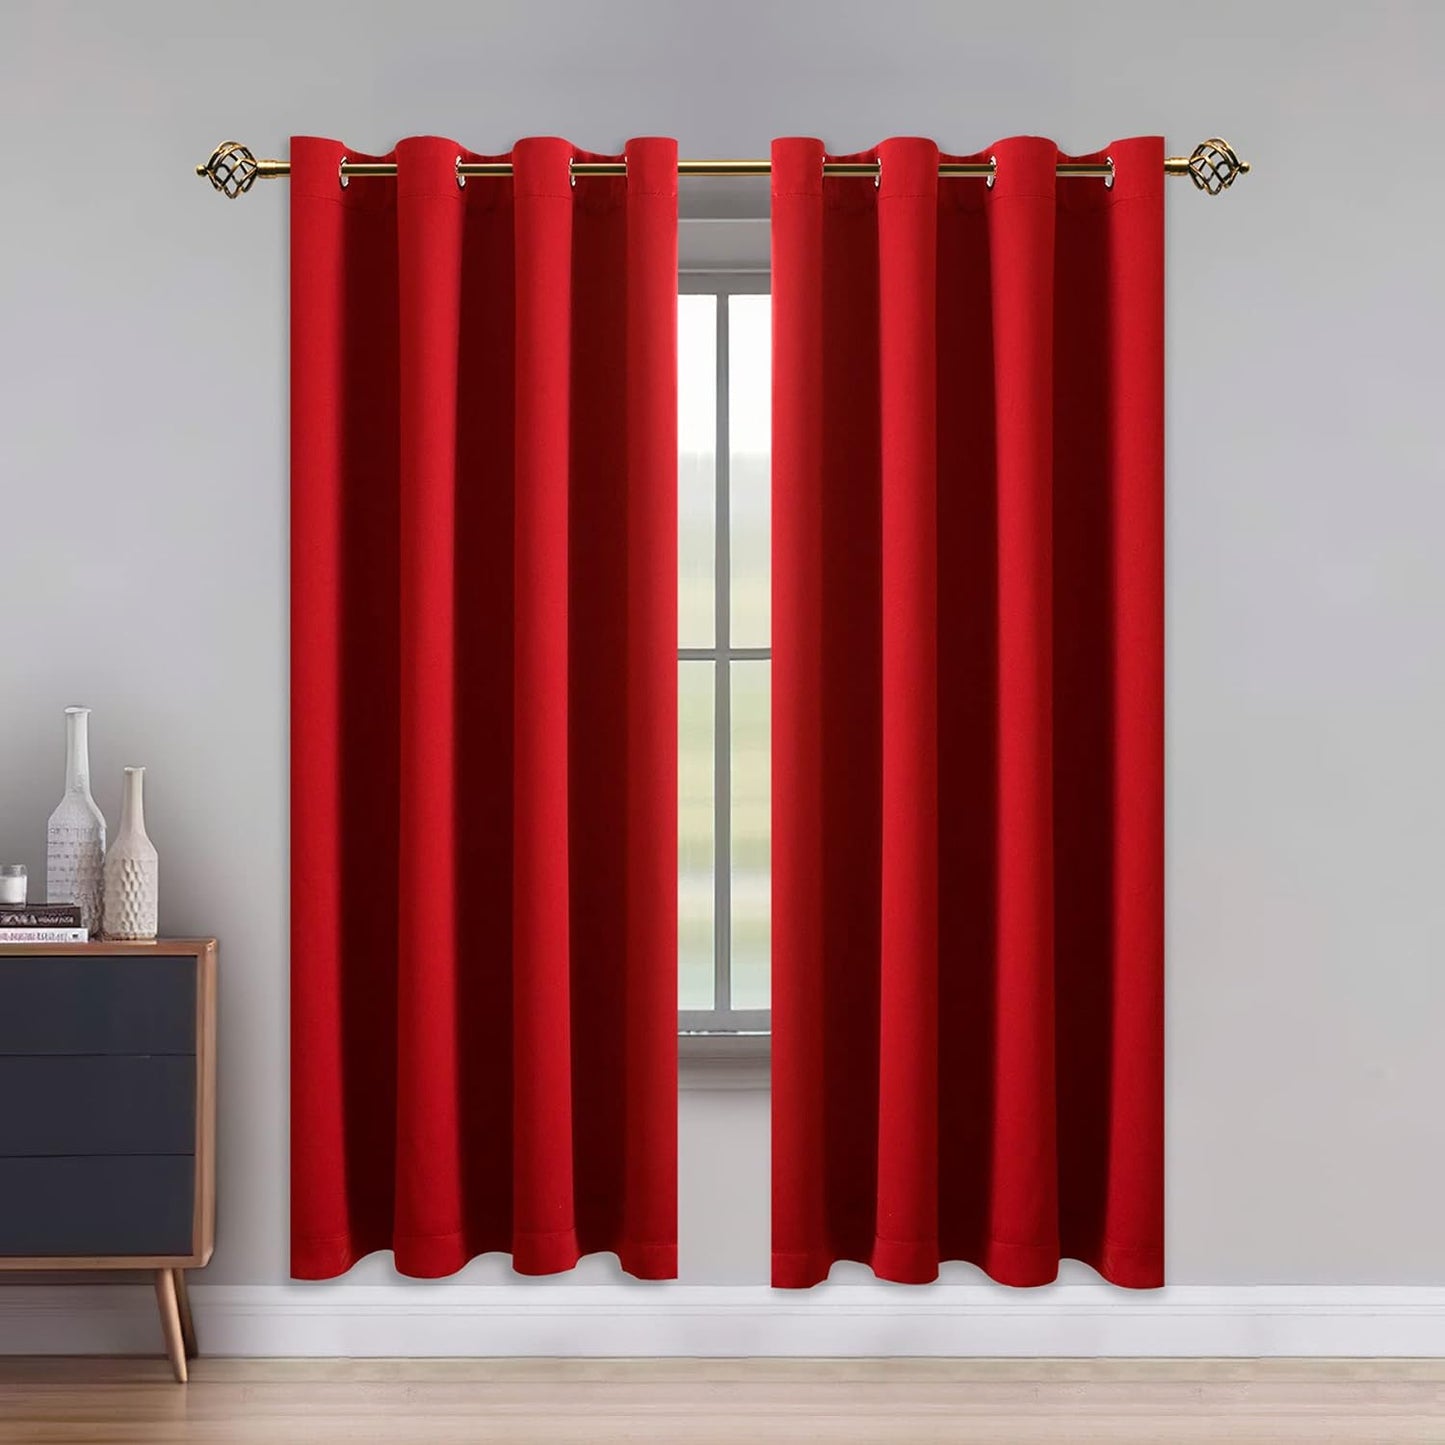 LUSHLEAF Blackout Curtains for Bedroom, Solid Thermal Insulated with Grommet Noise Reduction Window Drapes, Room Darkening Curtains for Living Room, 2 Panels, 52 X 63 Inch Grey  SHEEROOM Red 52 X 72 Inch 